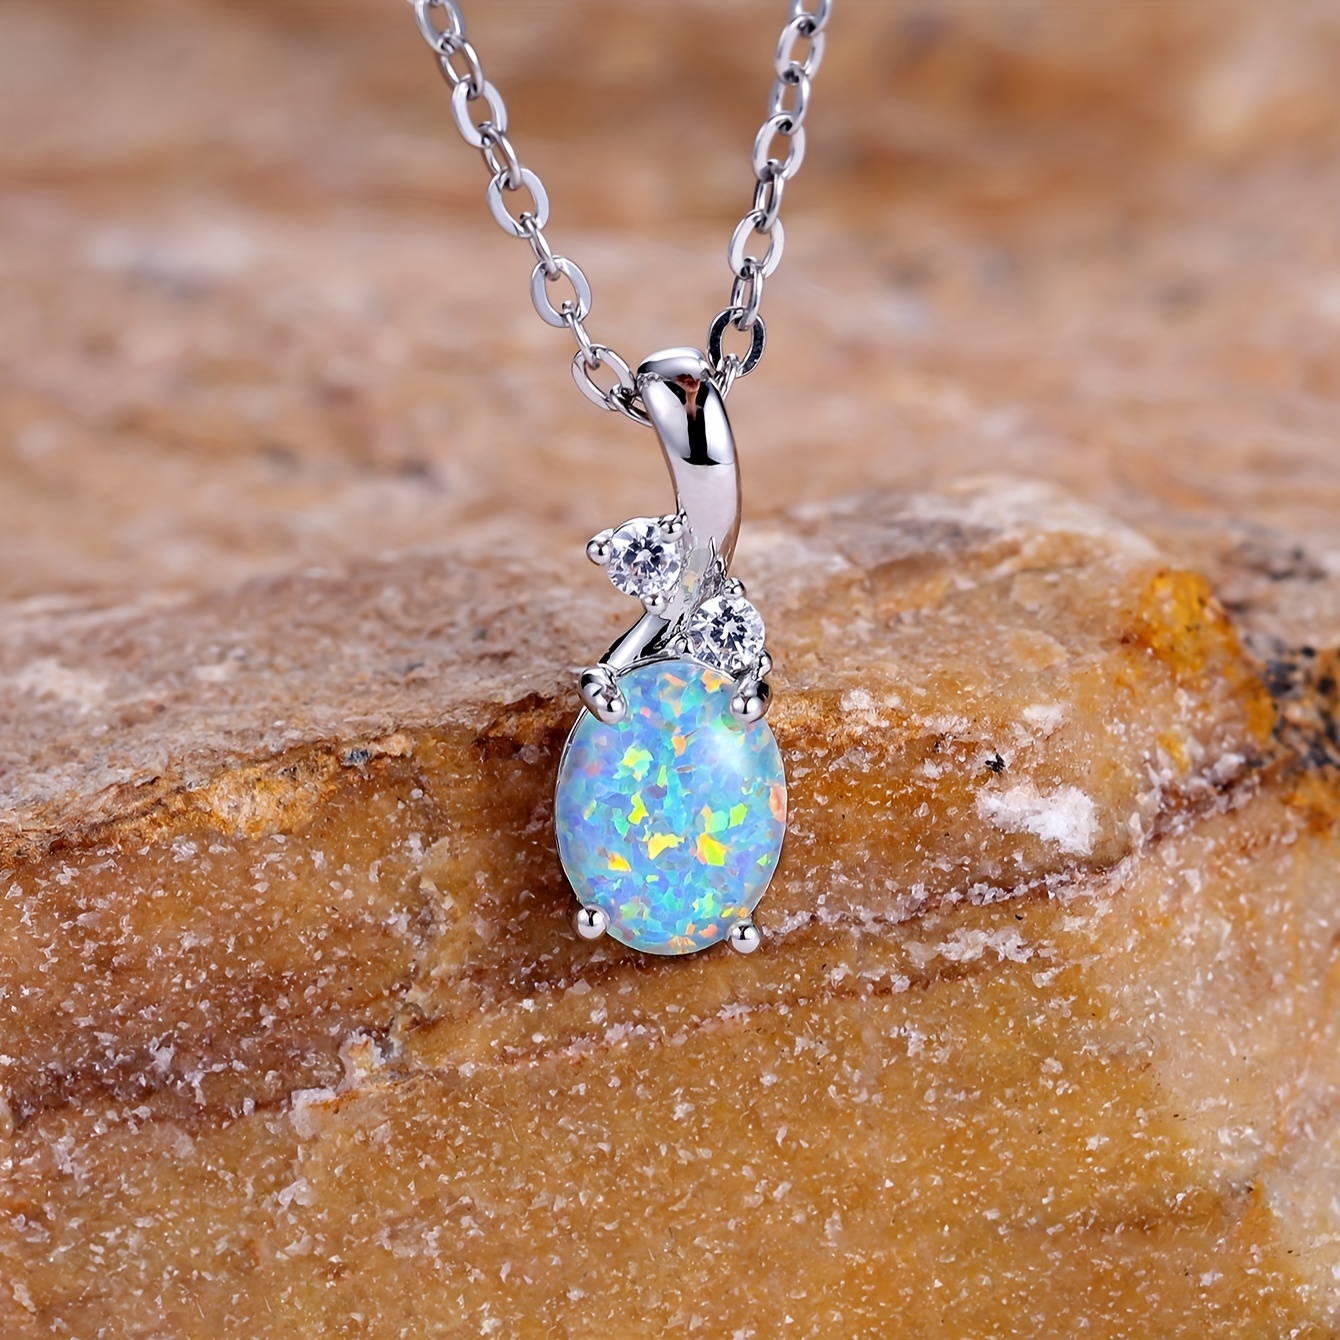 

Oval White Fire Opal Pendant Luxury Exquisite Necklace Wedding Jewelry Girlfriend Gift